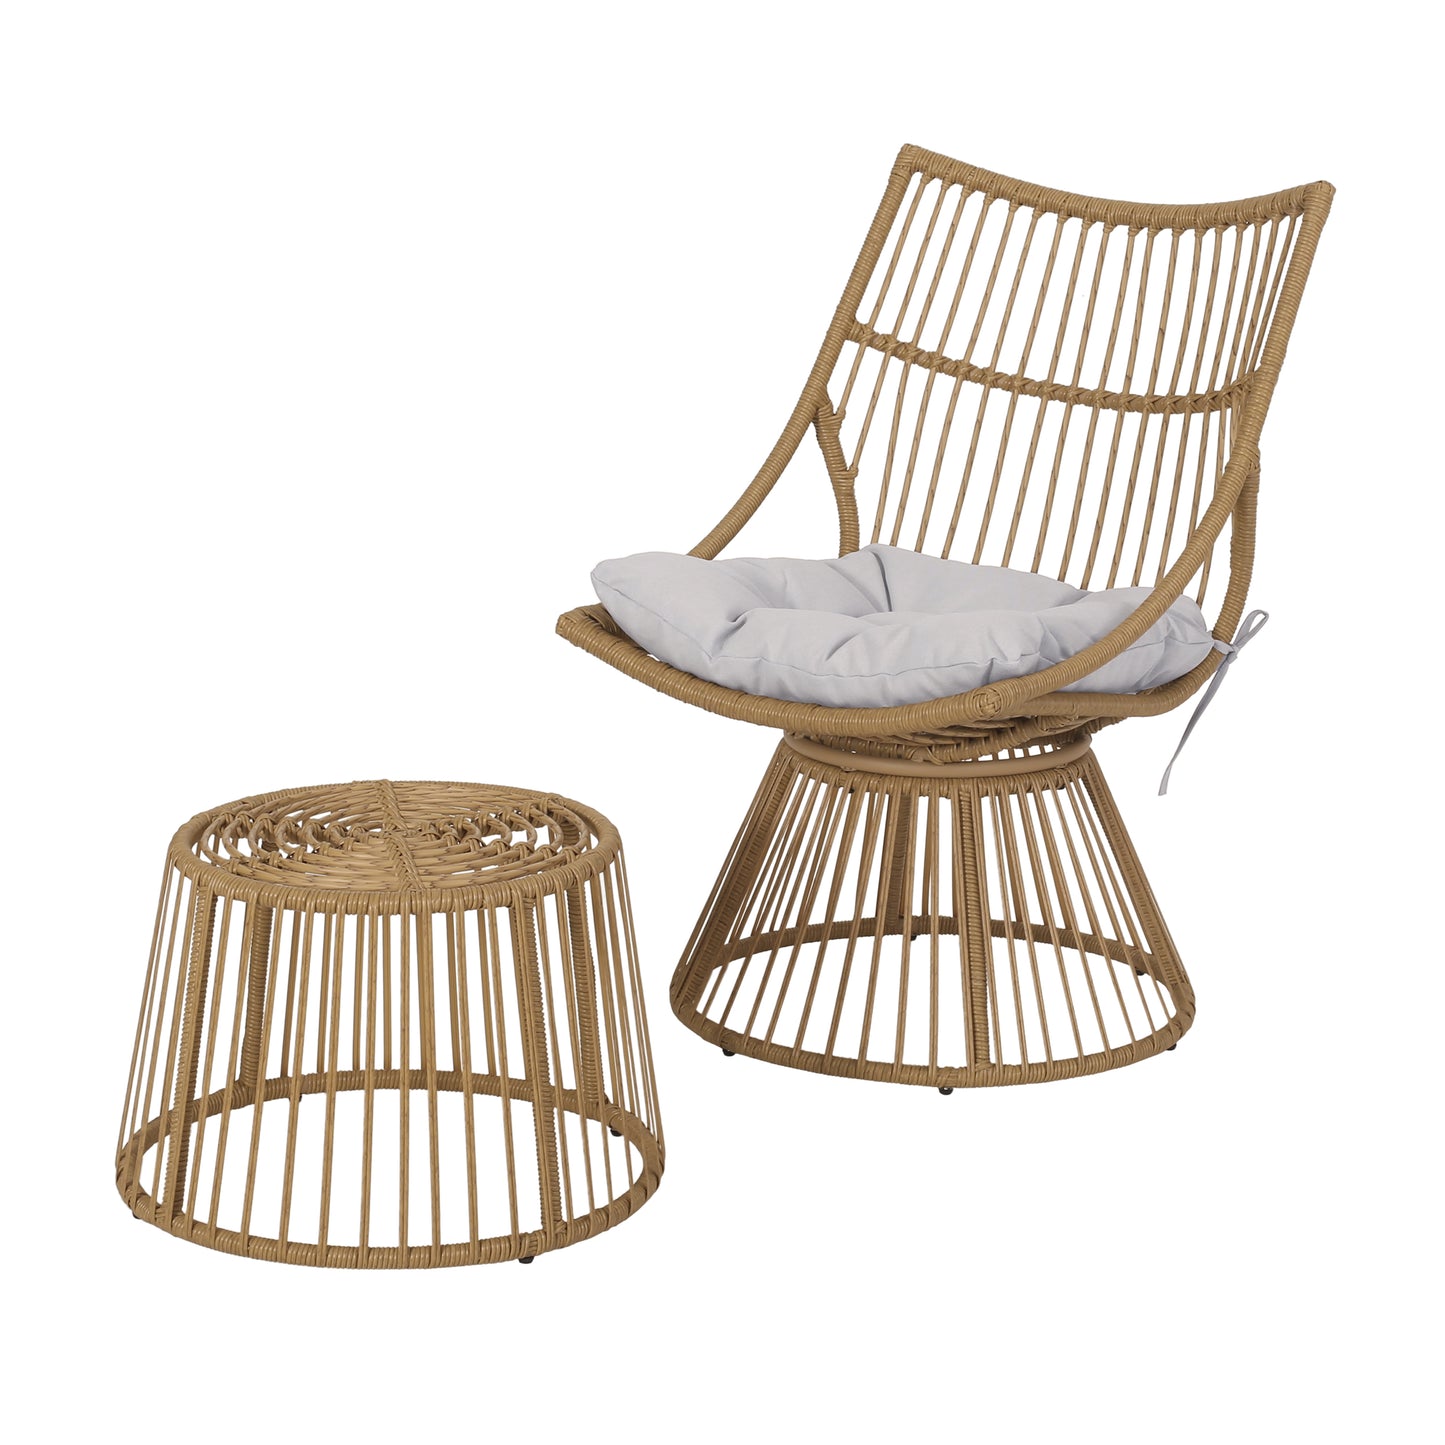 Apulia Outdoor Wicker Chair and Side Table Set with Cushion, Light Brown and Beige